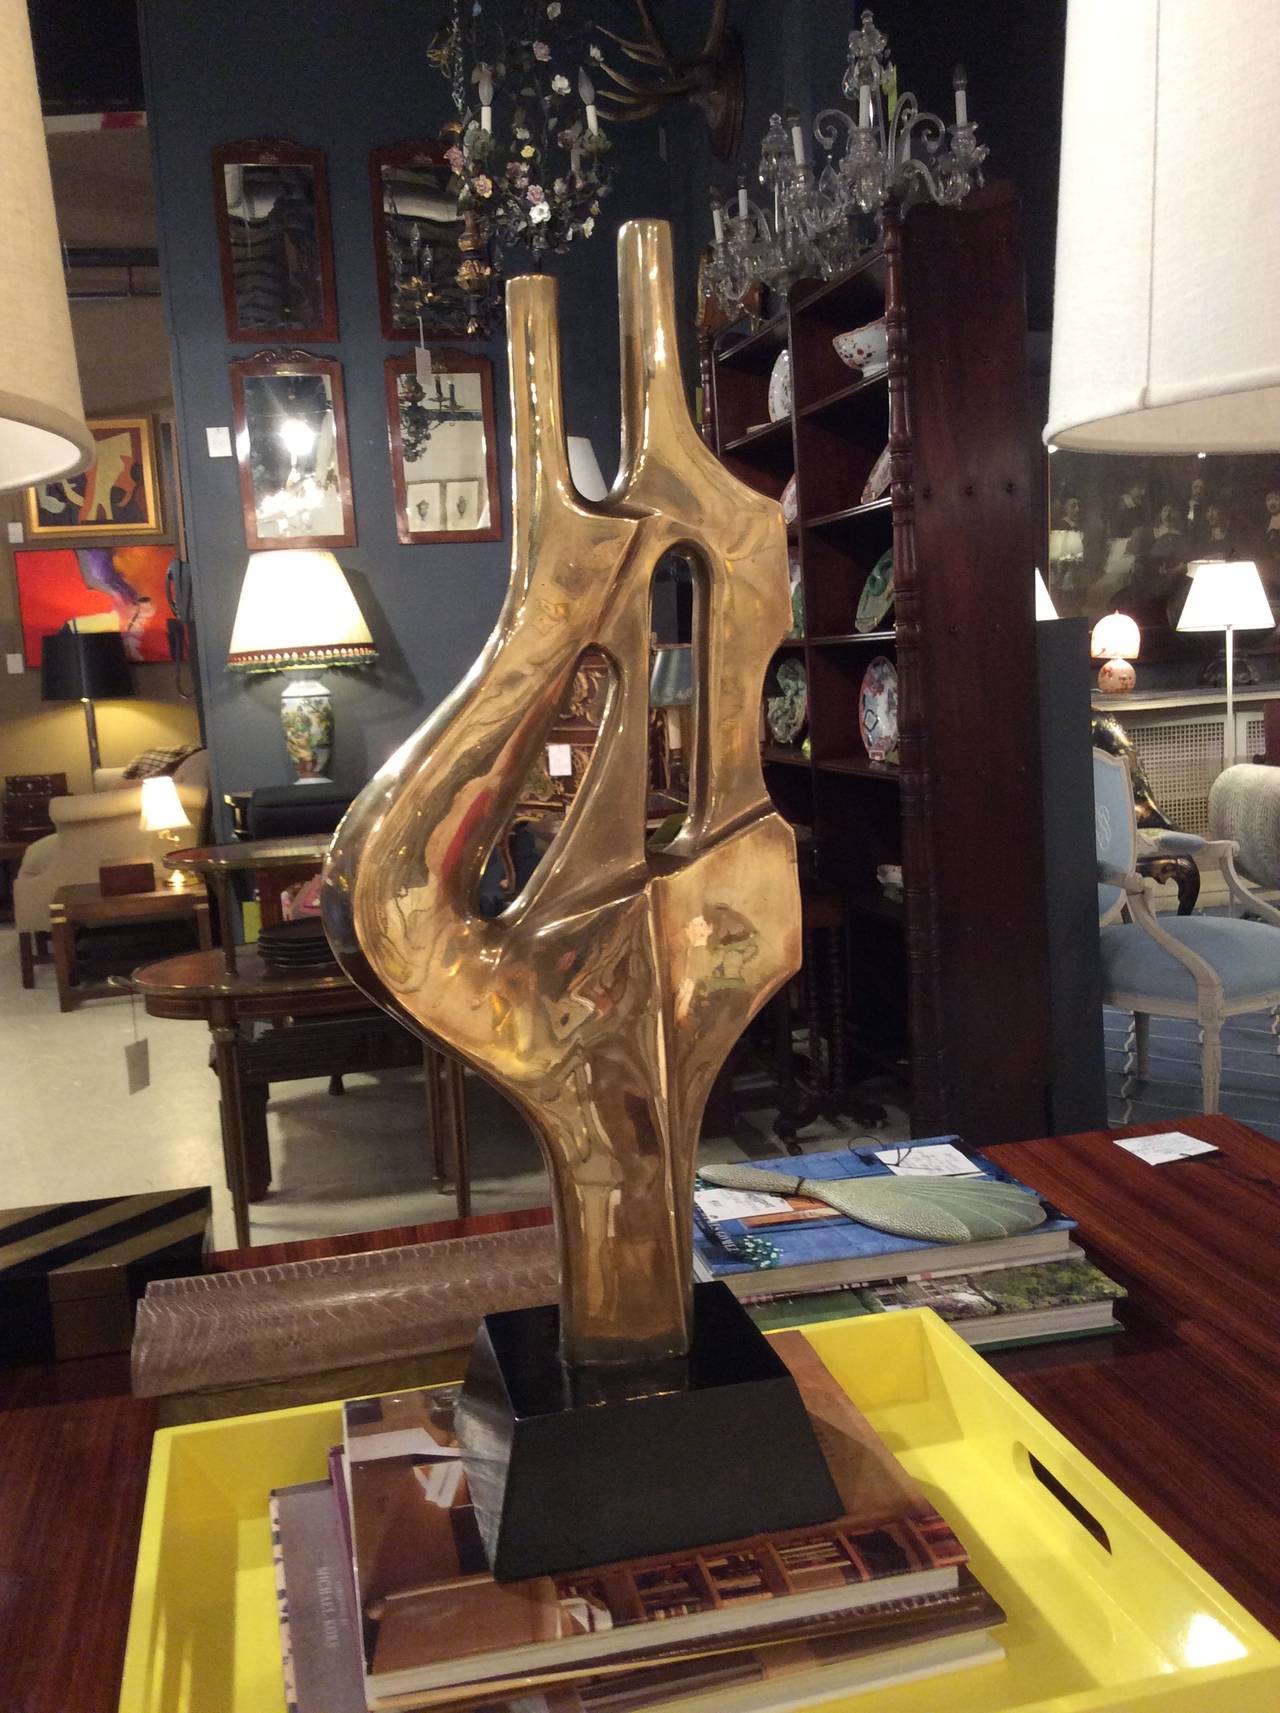 Graphic and large-scaled aged brass abstract sculpture on black lacquered base, in the style of American sculptor, Dorothy Dehner (1901-1994). Published piece in October 2012, Elle Decor, Ivanka Trump's Living Room on Park Avenue.